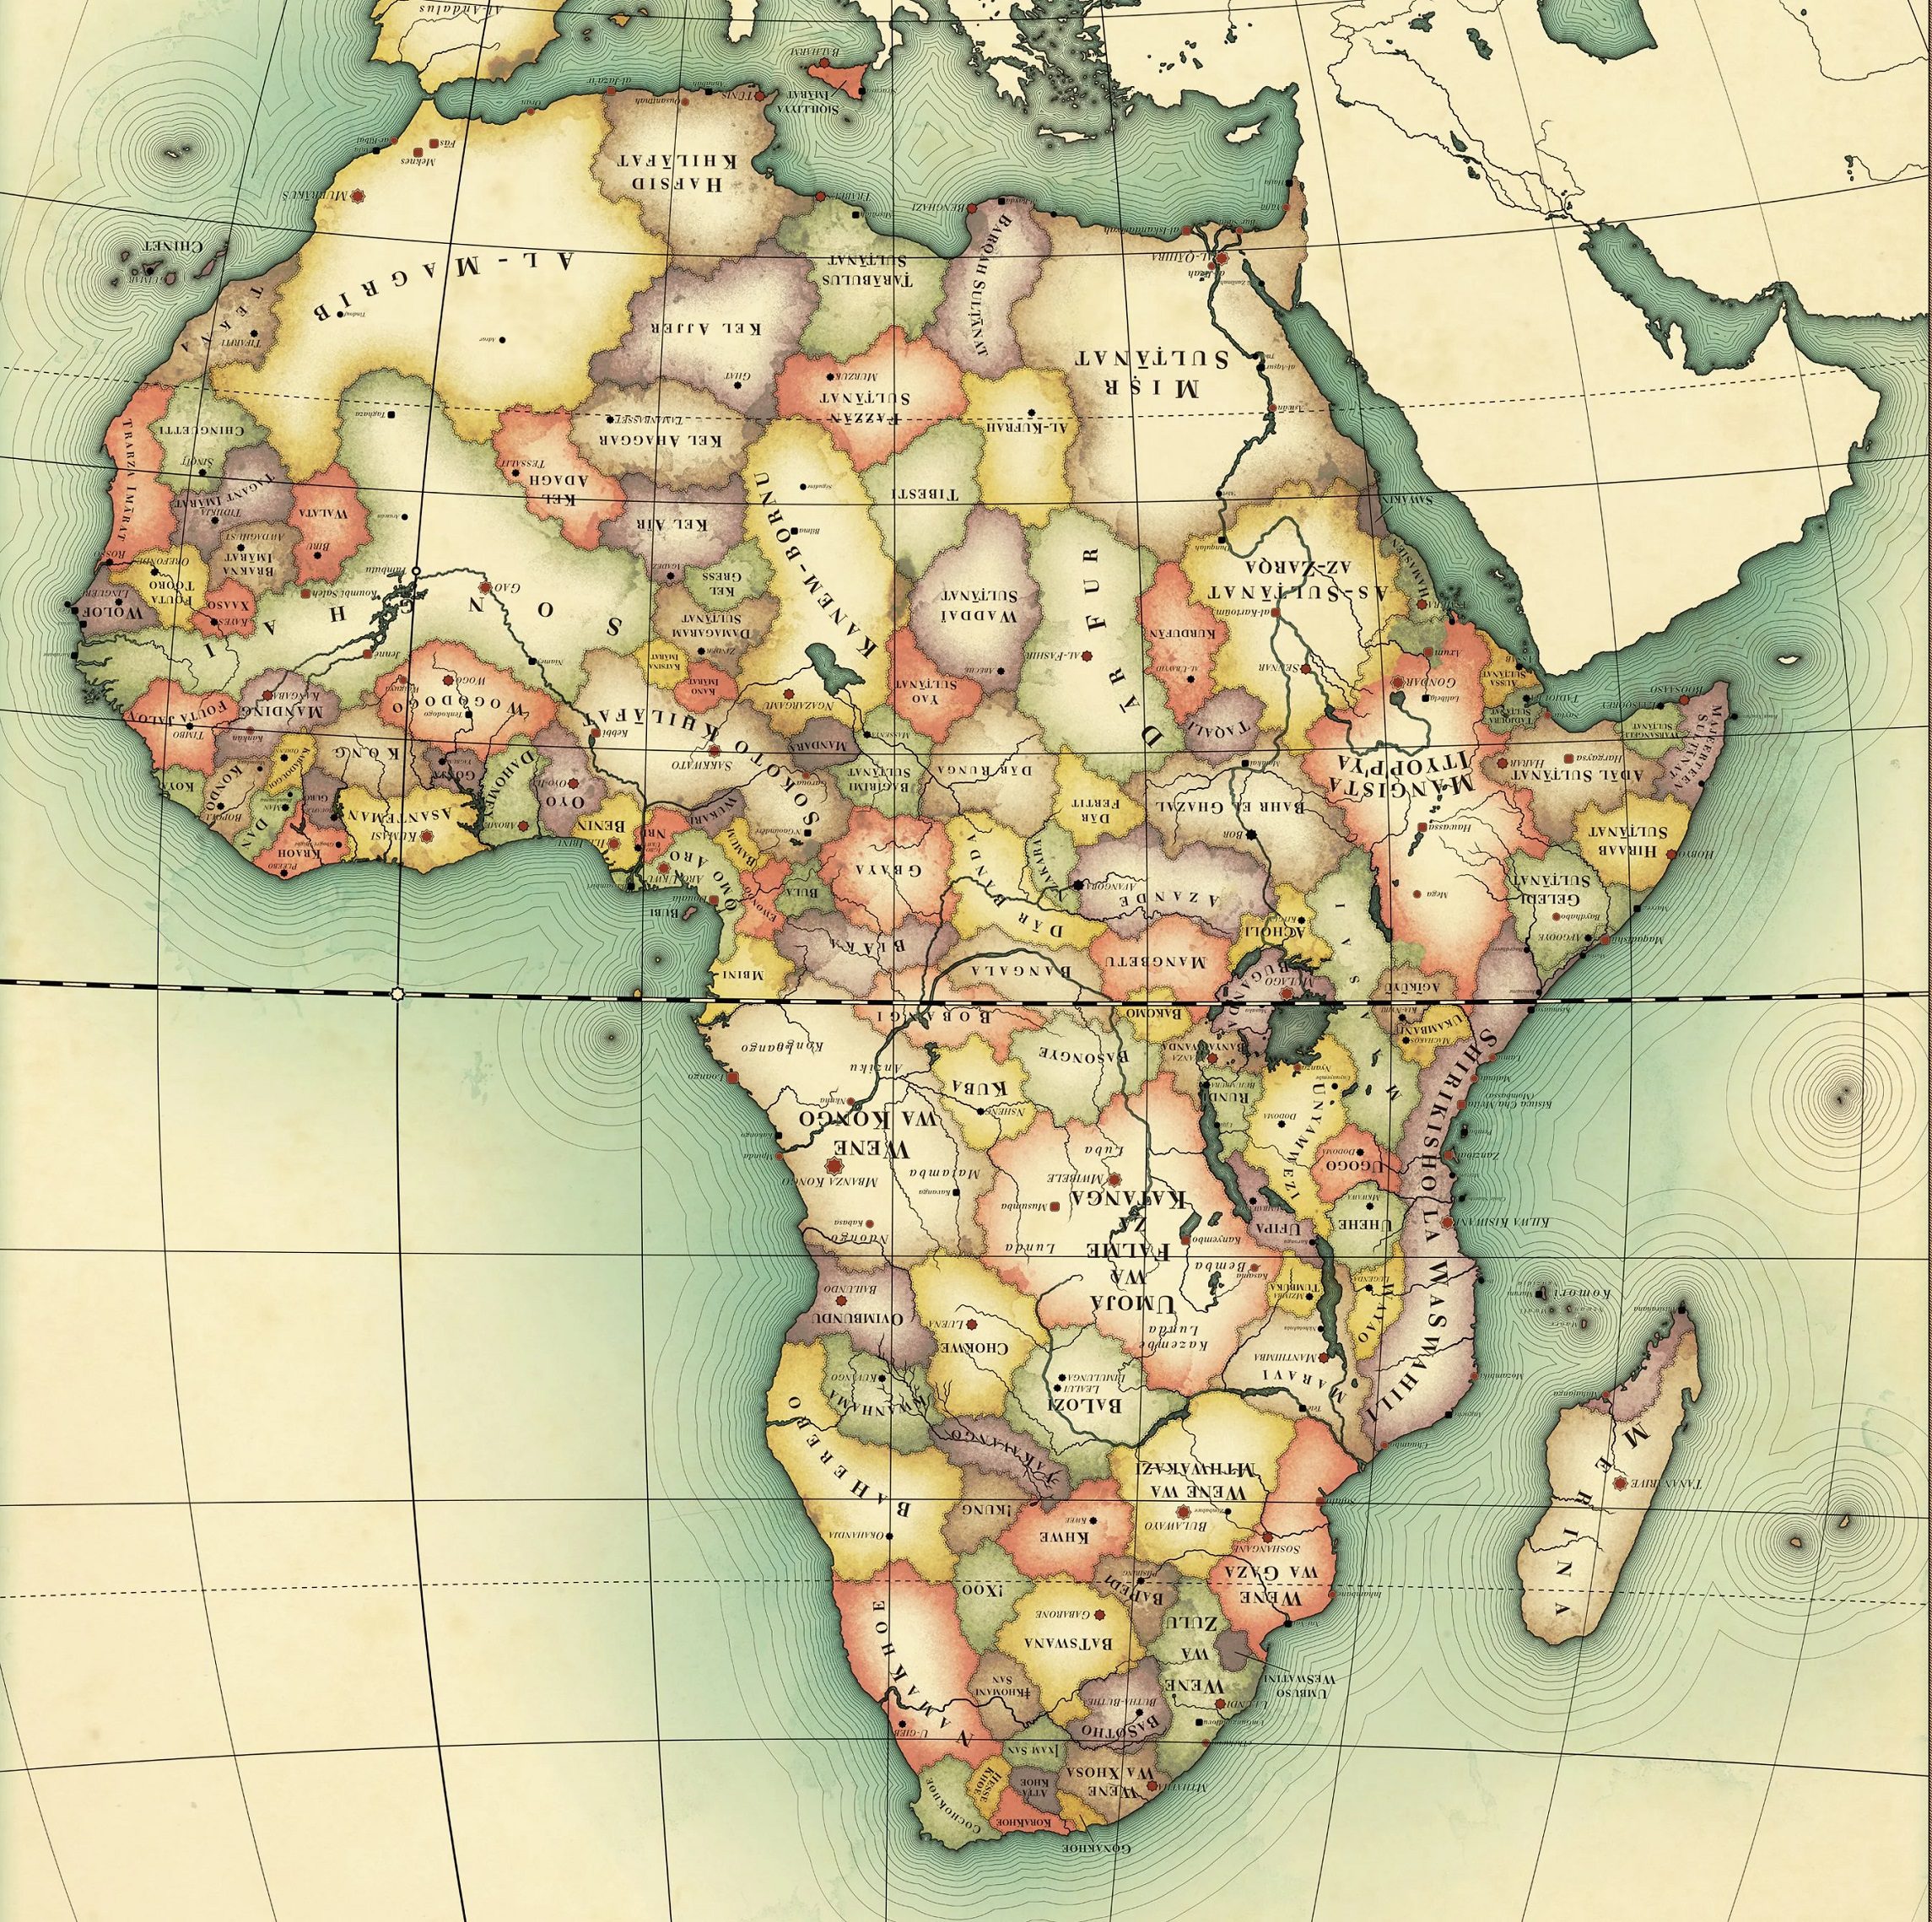 continent of Africa